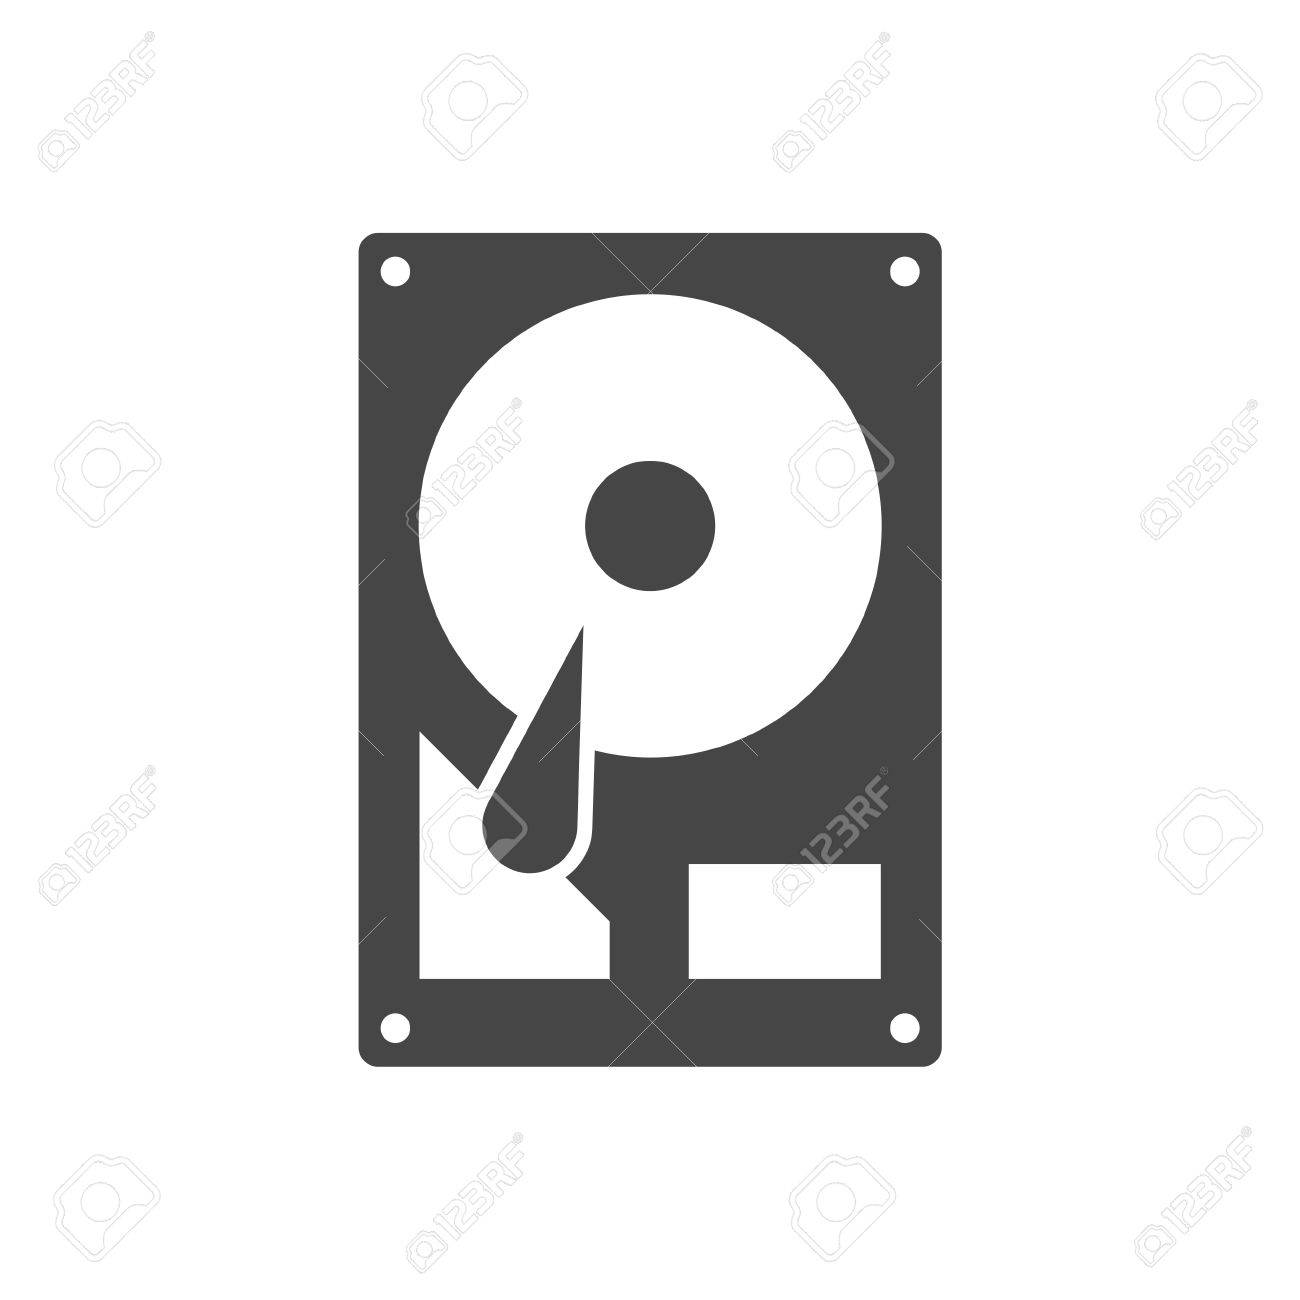 Hard drive Icons - 301 free vector icons